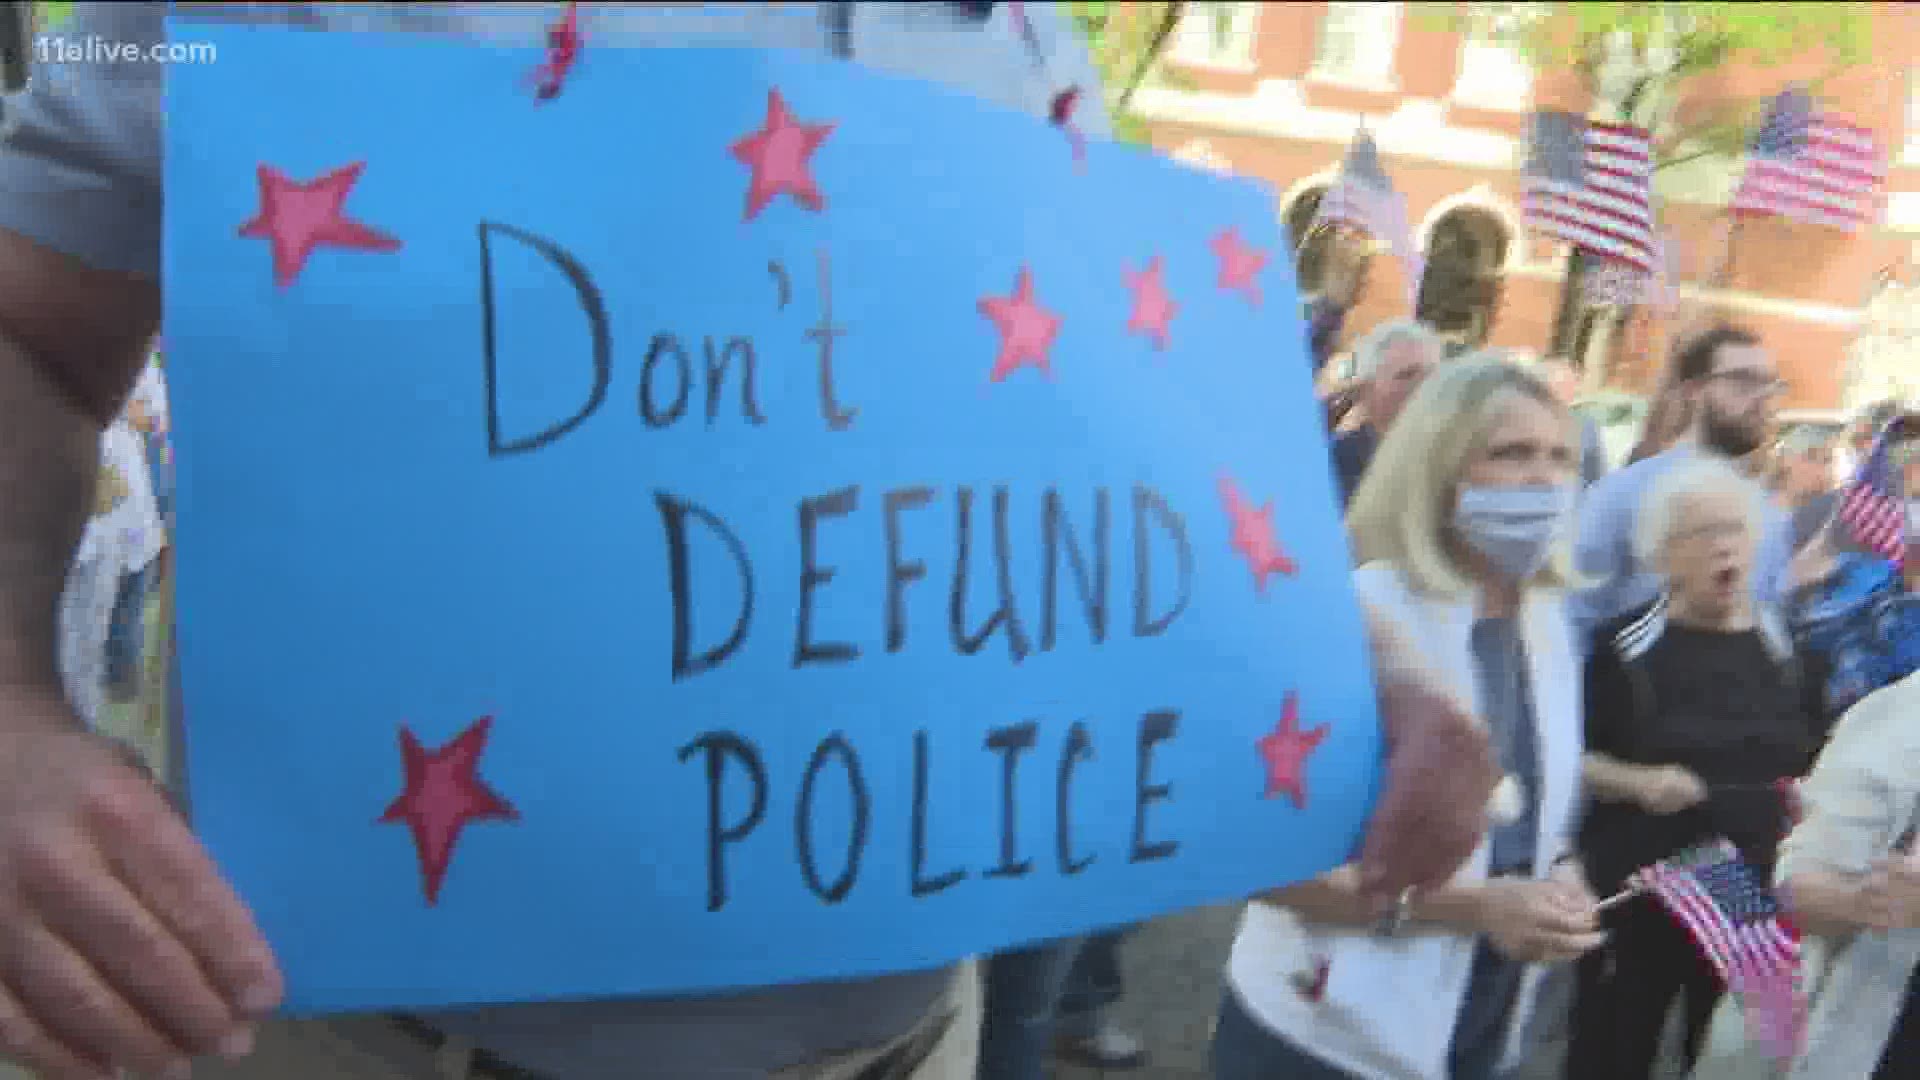 Crowds who showed up at City Hall were divided about the proposal to defund police